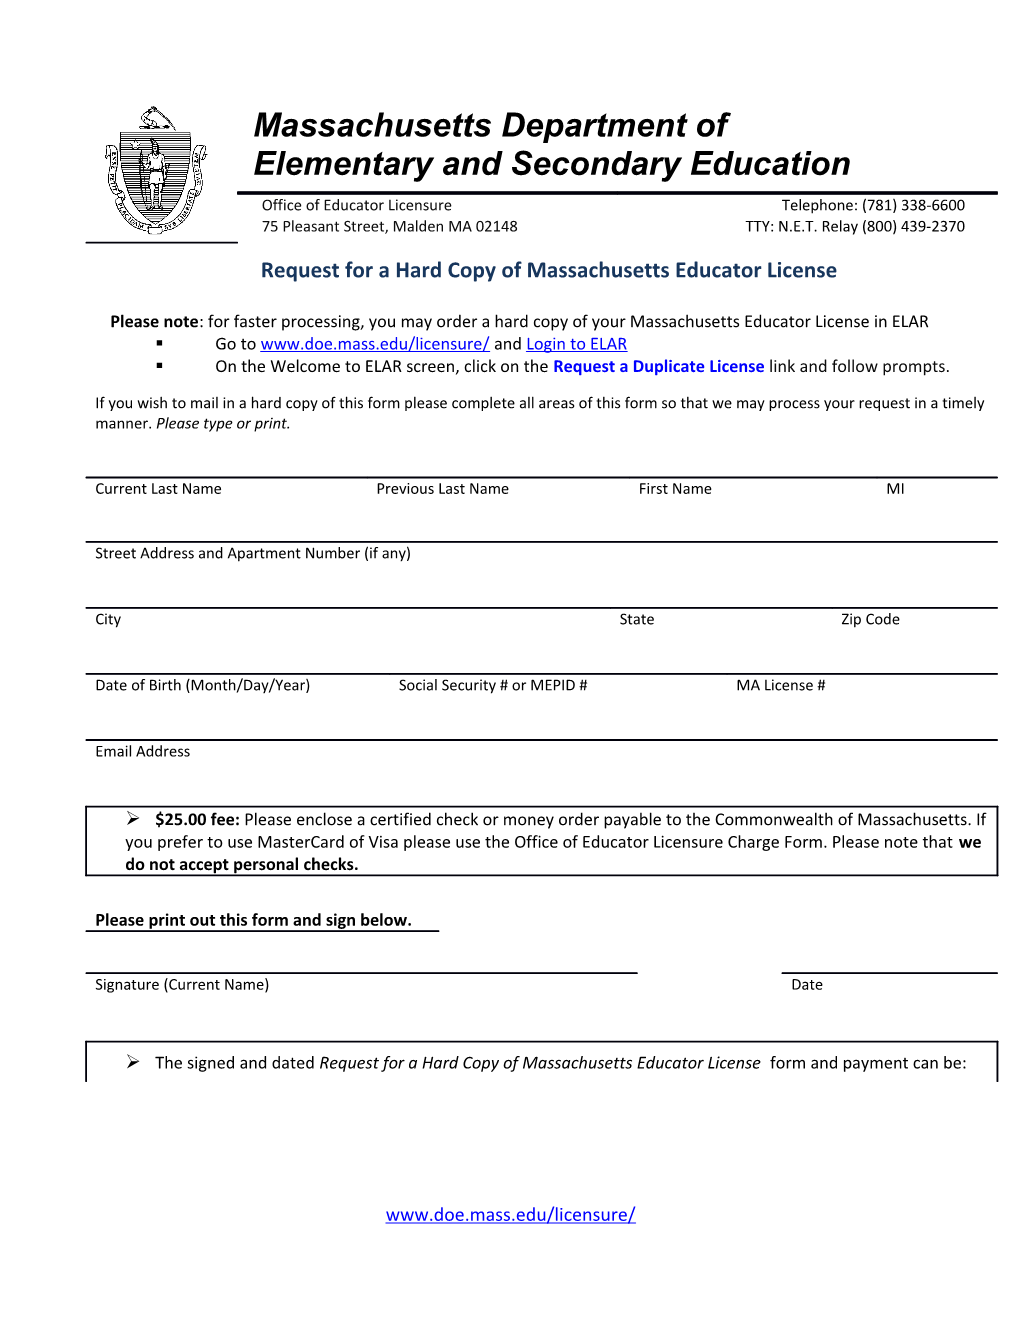 Request for a Hard Copy of License Form